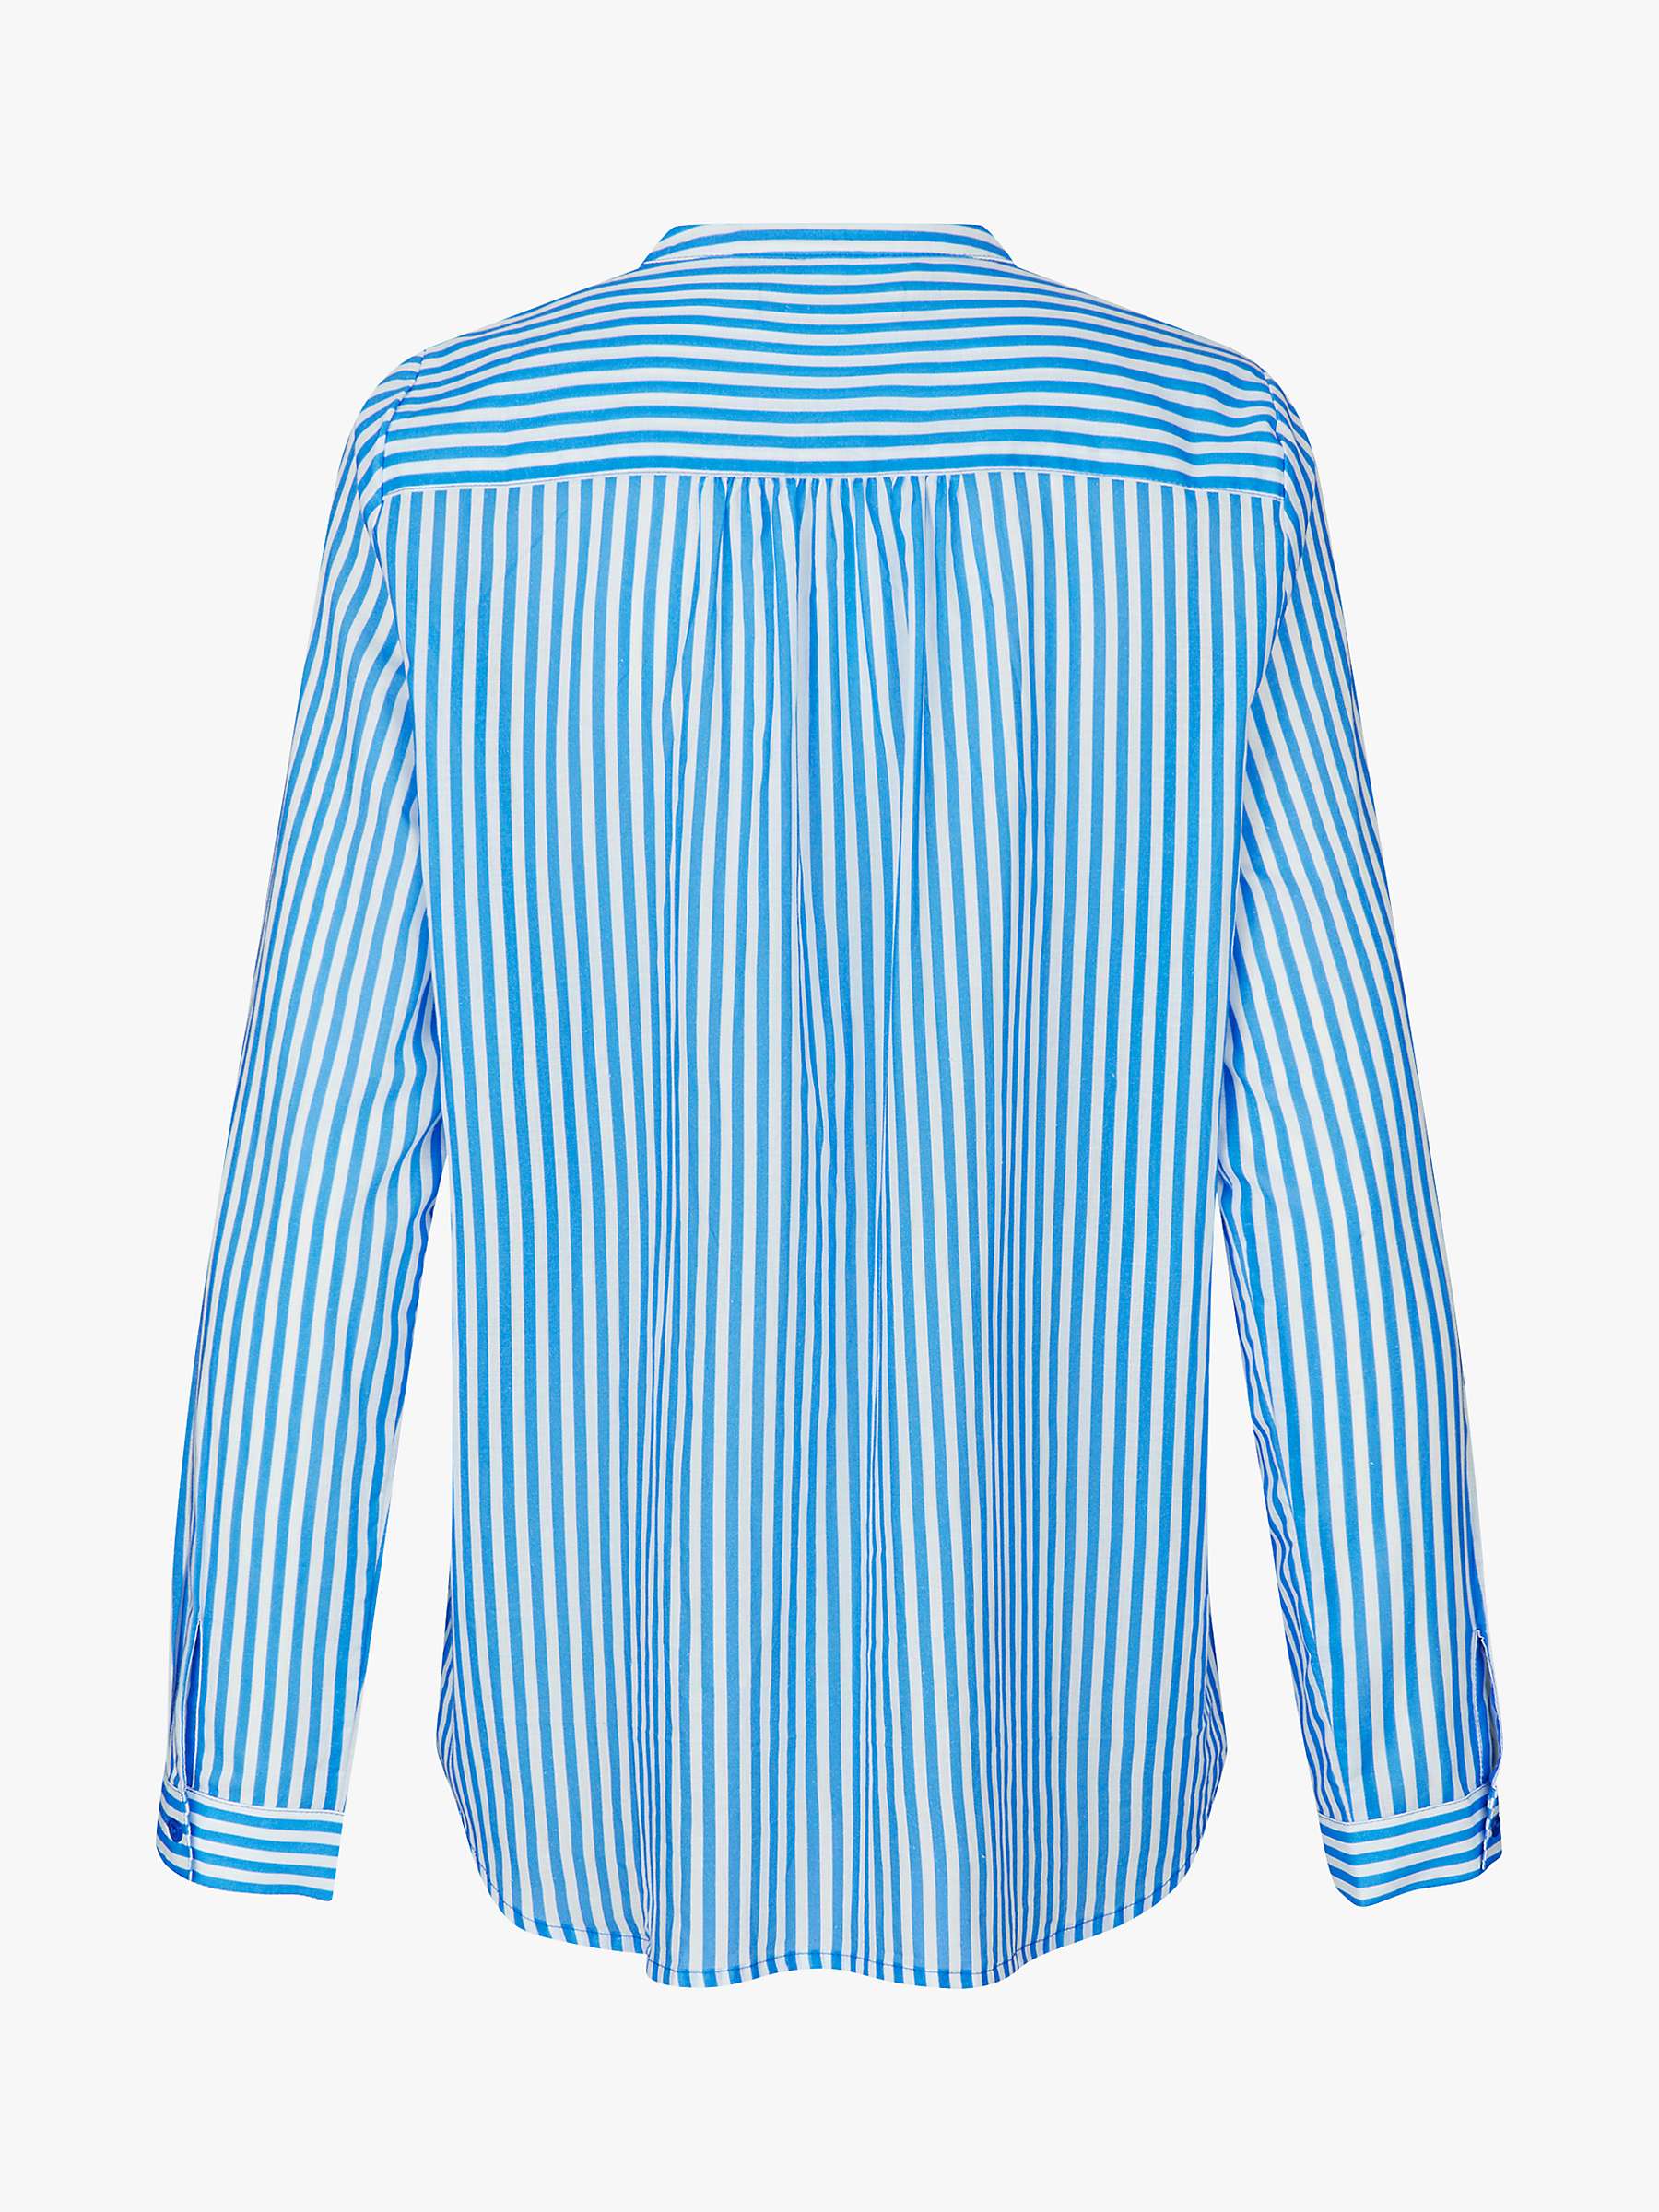 Buy Lollys Laundry Lux Organic Cotton Striped Shirt, Blue/White Online at johnlewis.com